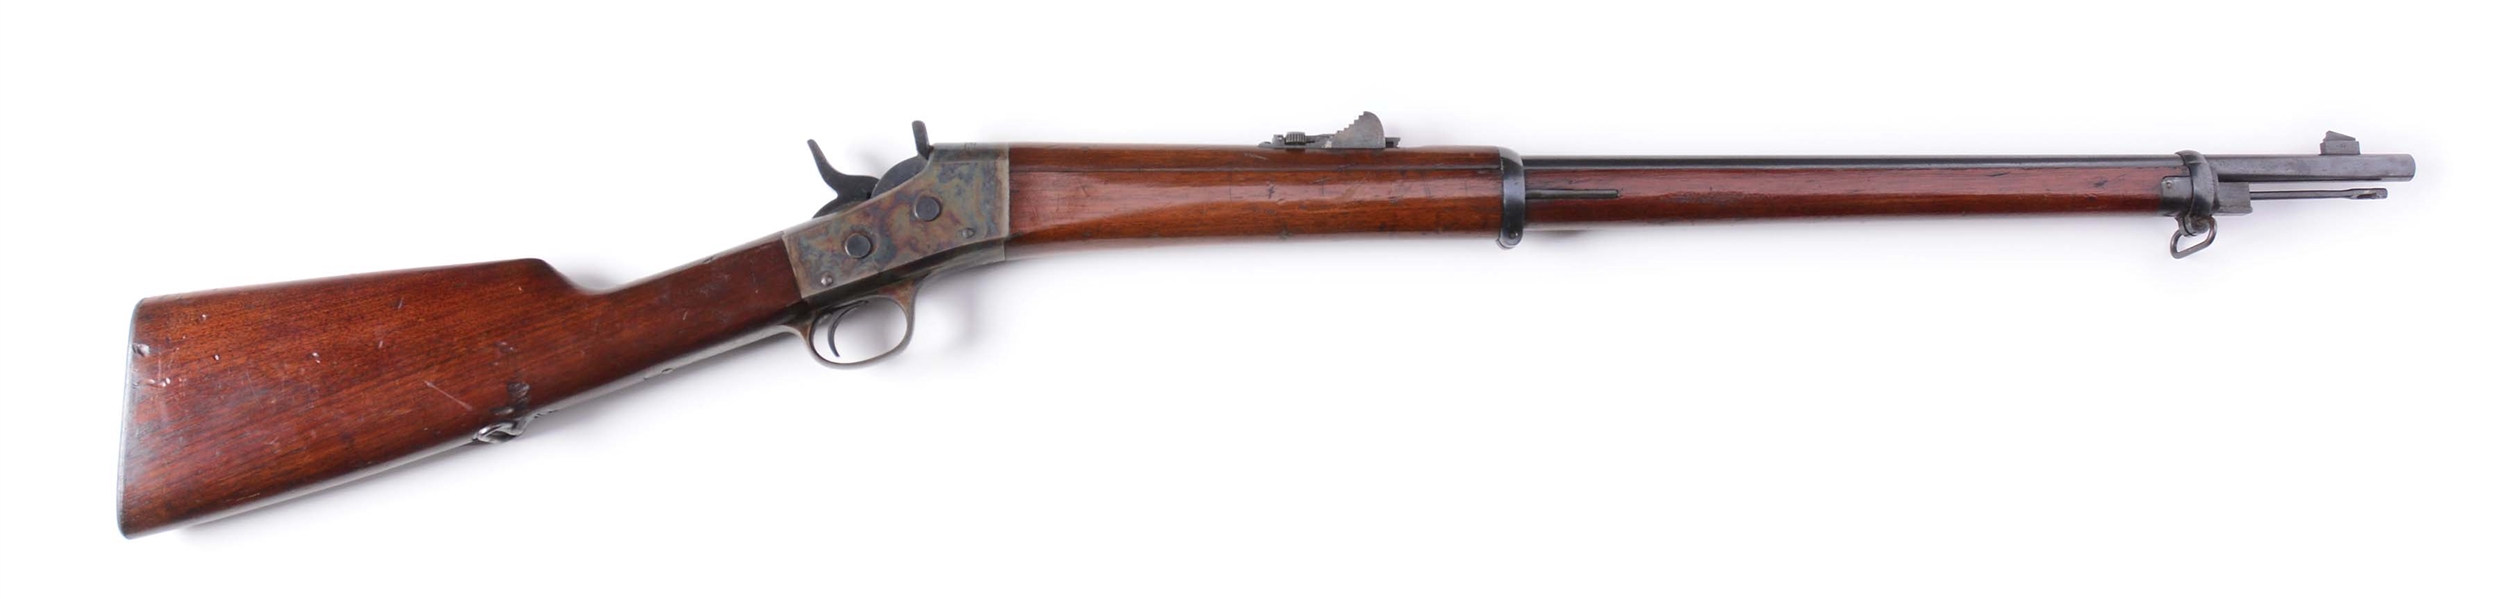 (A) EXCEPTIONALLY RARE REMINGTON MODEL 1896 ROLLING BLOCK RIFLE, ONE OF APPROXIMATELY 35 SUPPLIED TO "USS NIAGARA" FOR SERVICE IN THE SPANISH AMERICAN WAR.